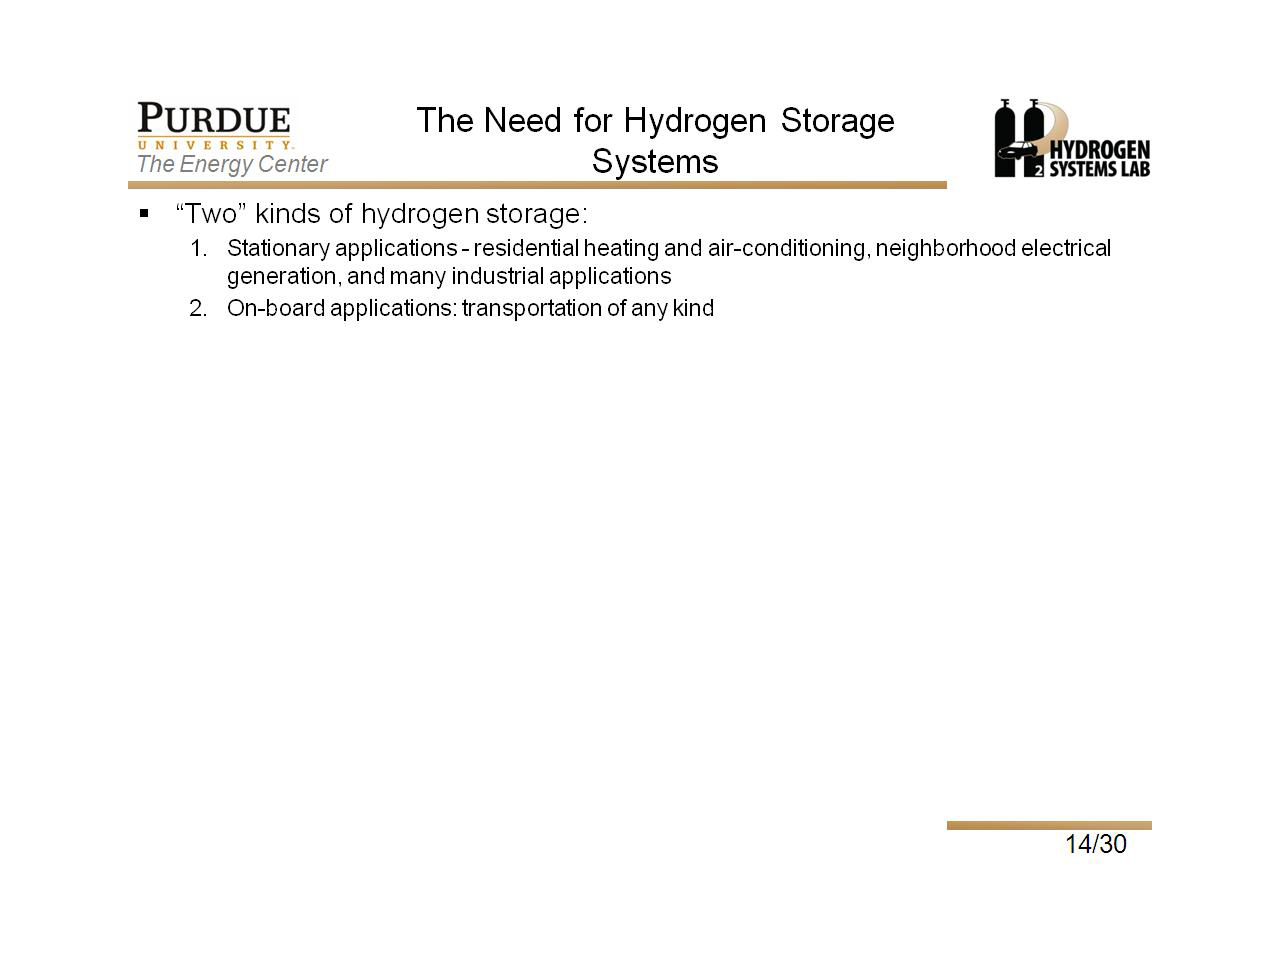 The Need for Hydrogen Storage Systems